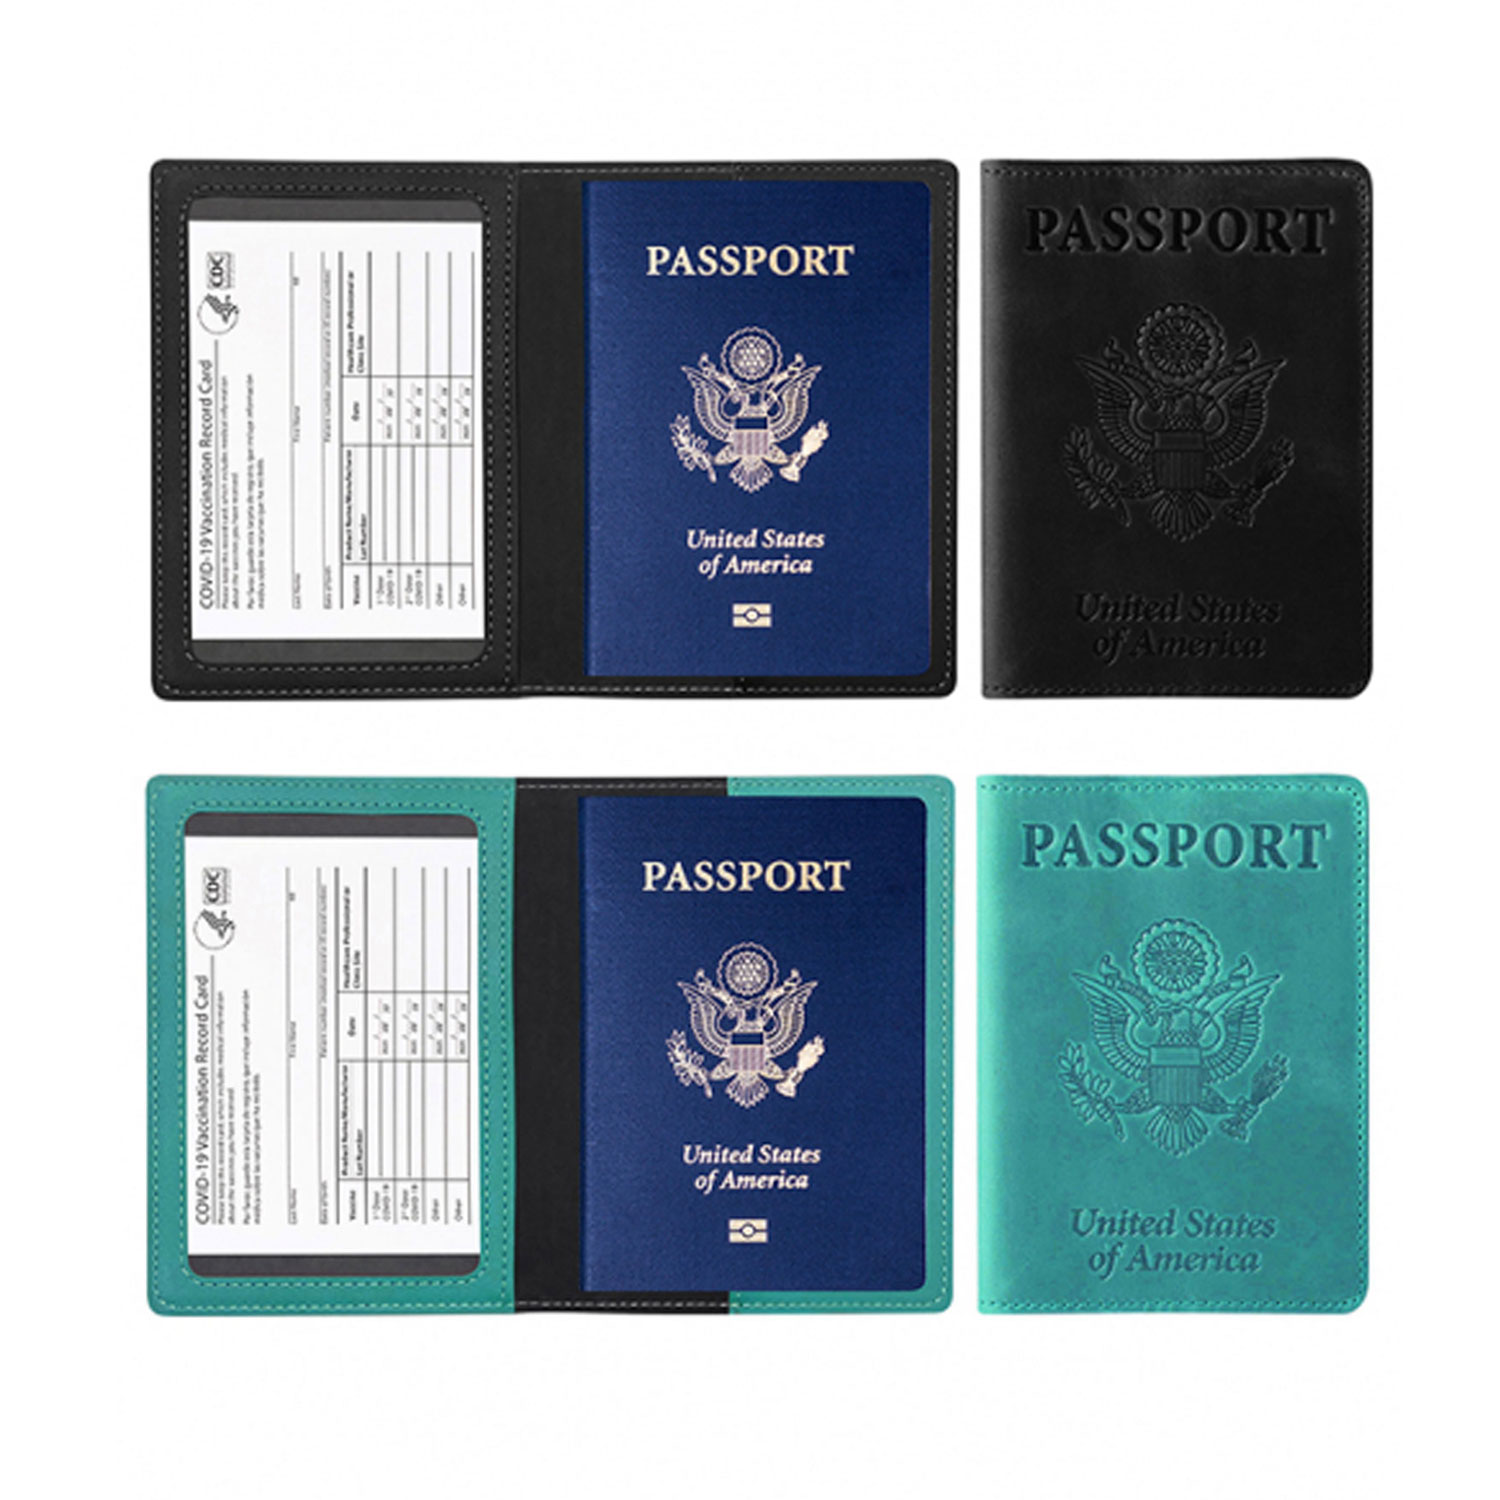 Passport Holder With CDC Vaccination Card Protector 2 Pack